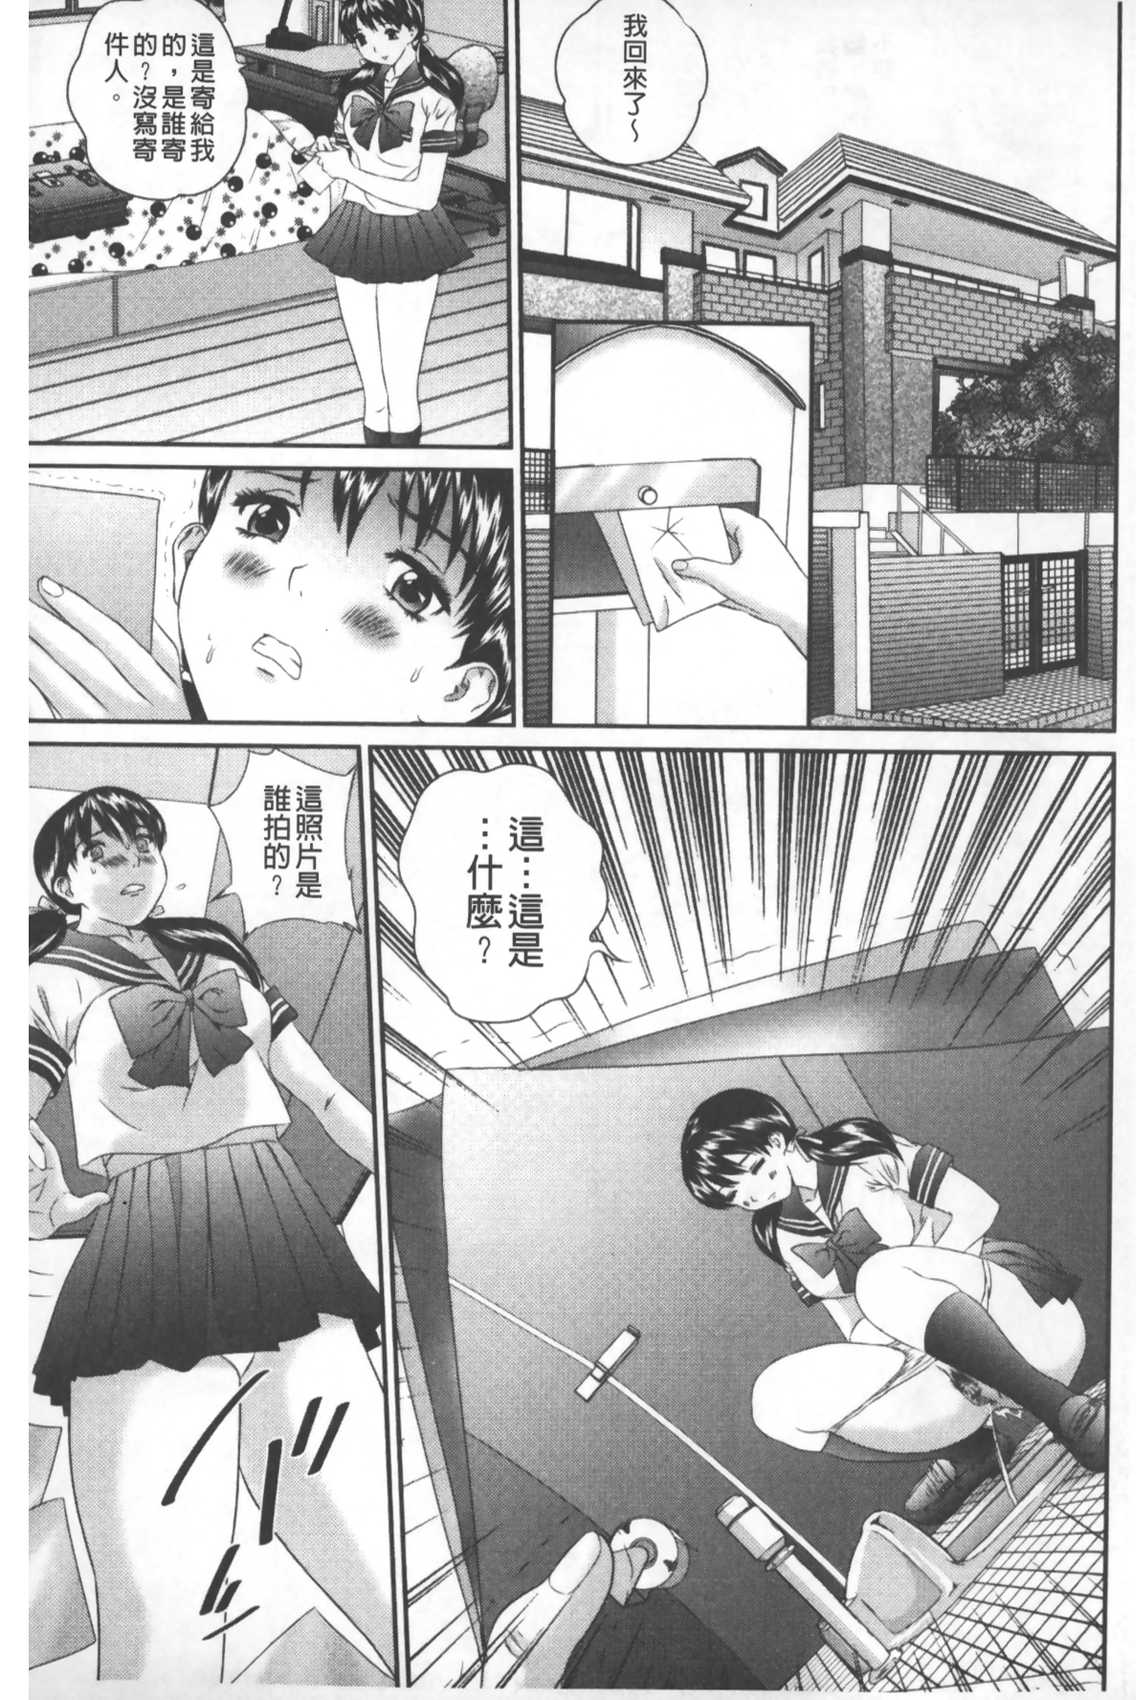 [Manzou] Tousatsu Collector | 盜拍題材精選集 [Chinese] page 6 full